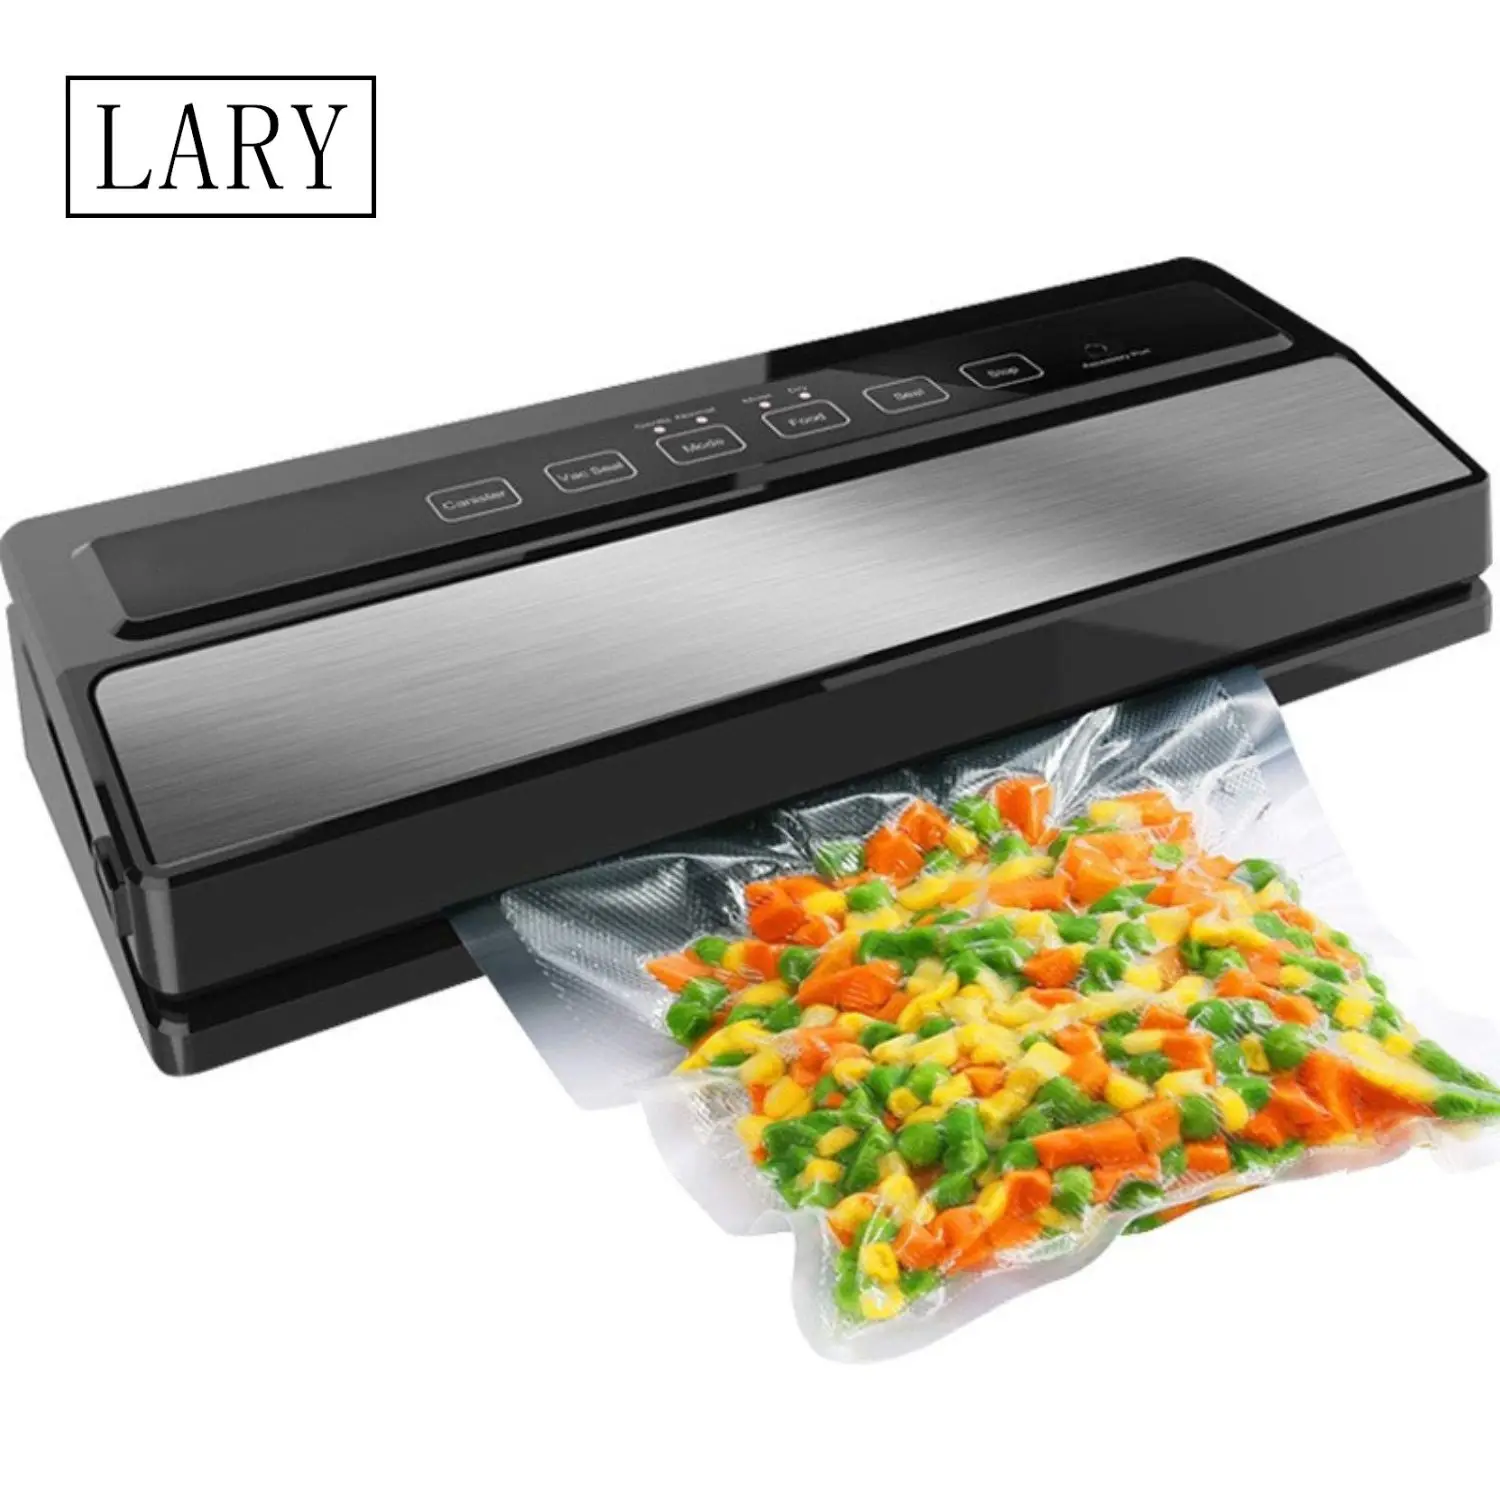 

LARY Automatic Vacuum Sealer Sous Vide Food Saver With 5pcs Free Bags Silver Style Commercial Household Packer Perfect Gift